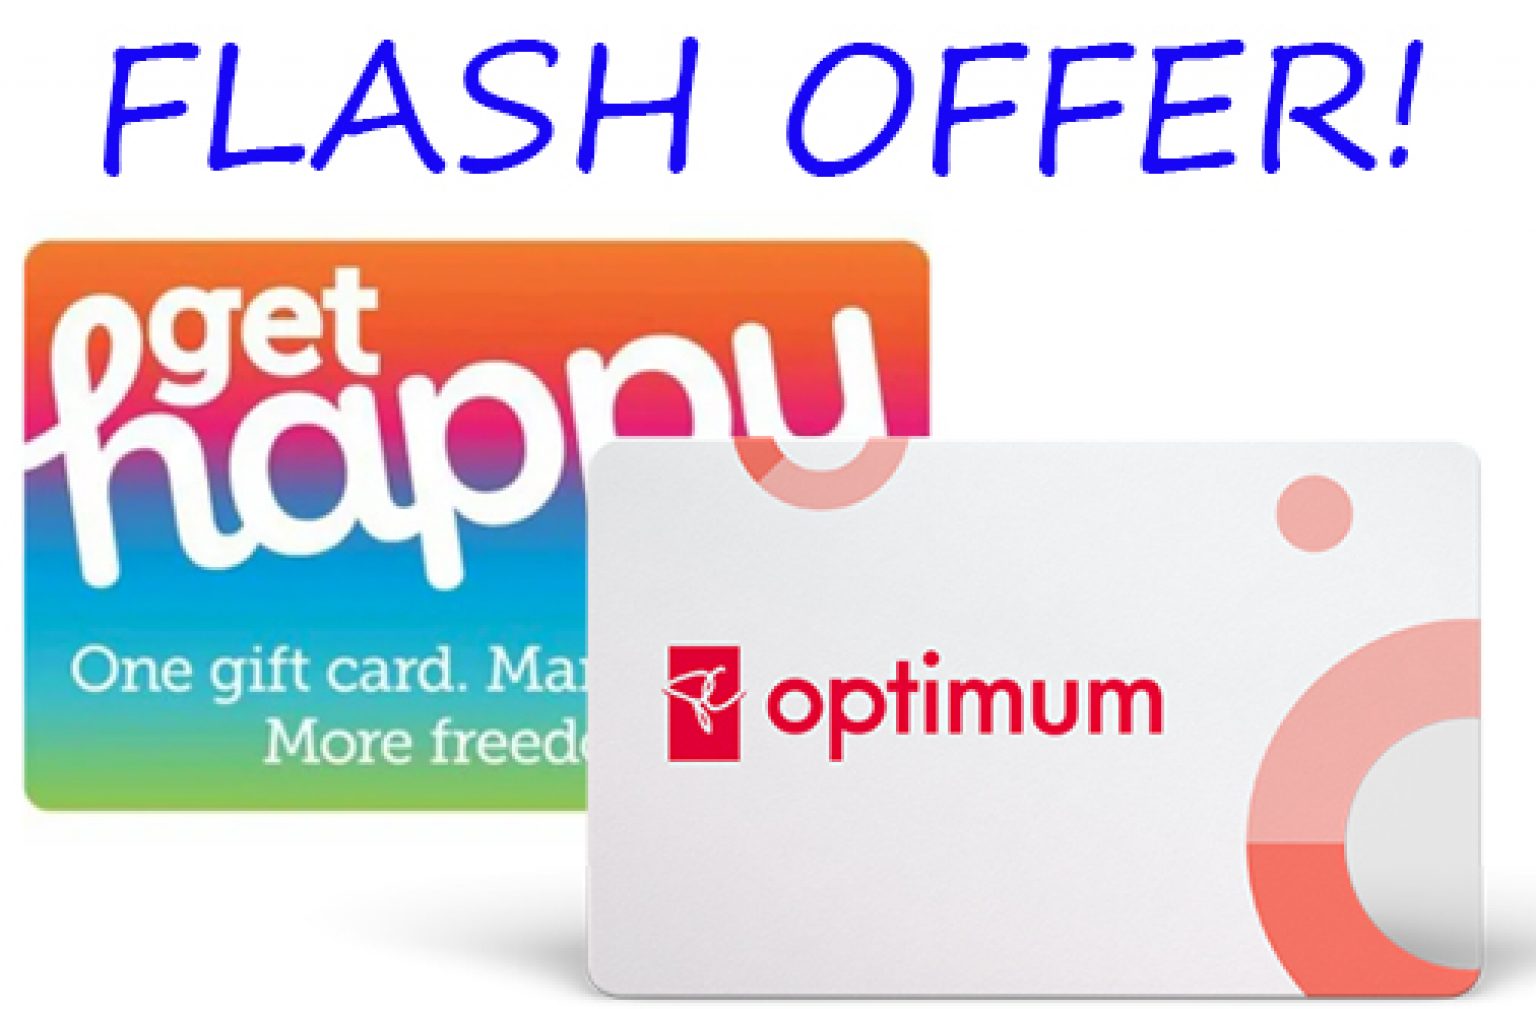 PC Optimum Flash Offer Happy Brand Gift Cards — Deals from